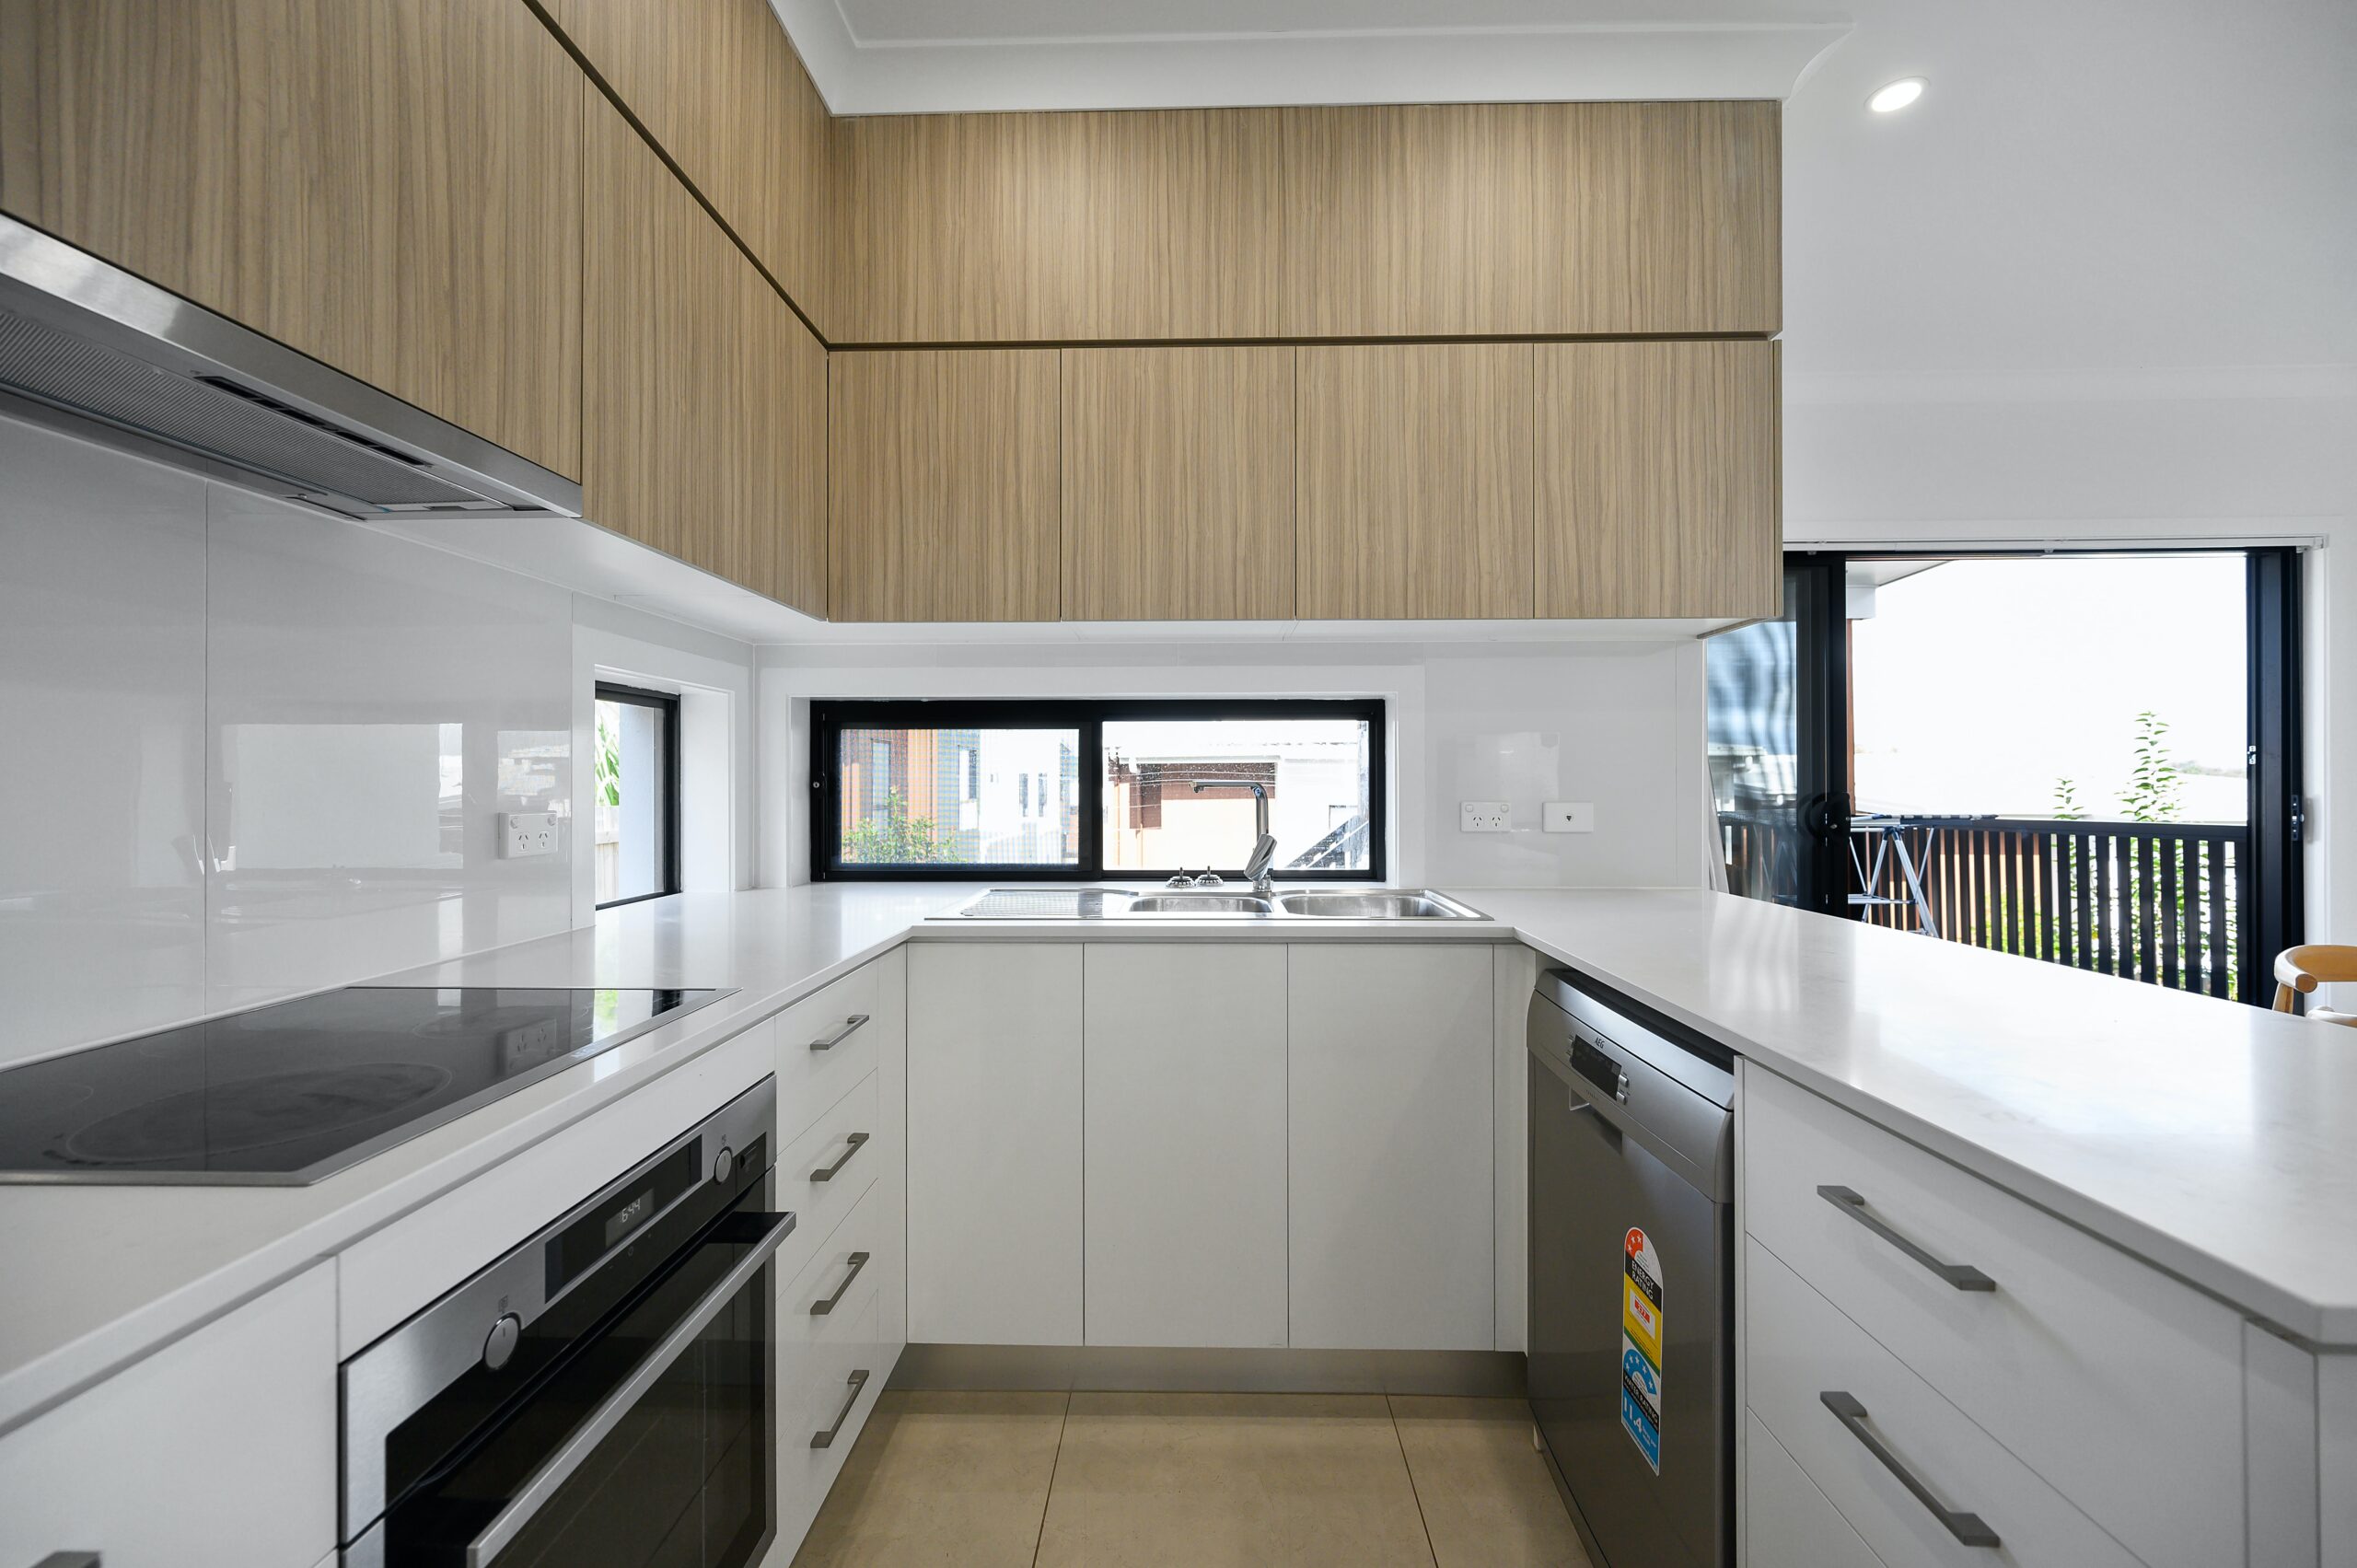 An image showcasing a beautifully designed modular kitchen, representing the efficiency, style, and allure of these kitchens.